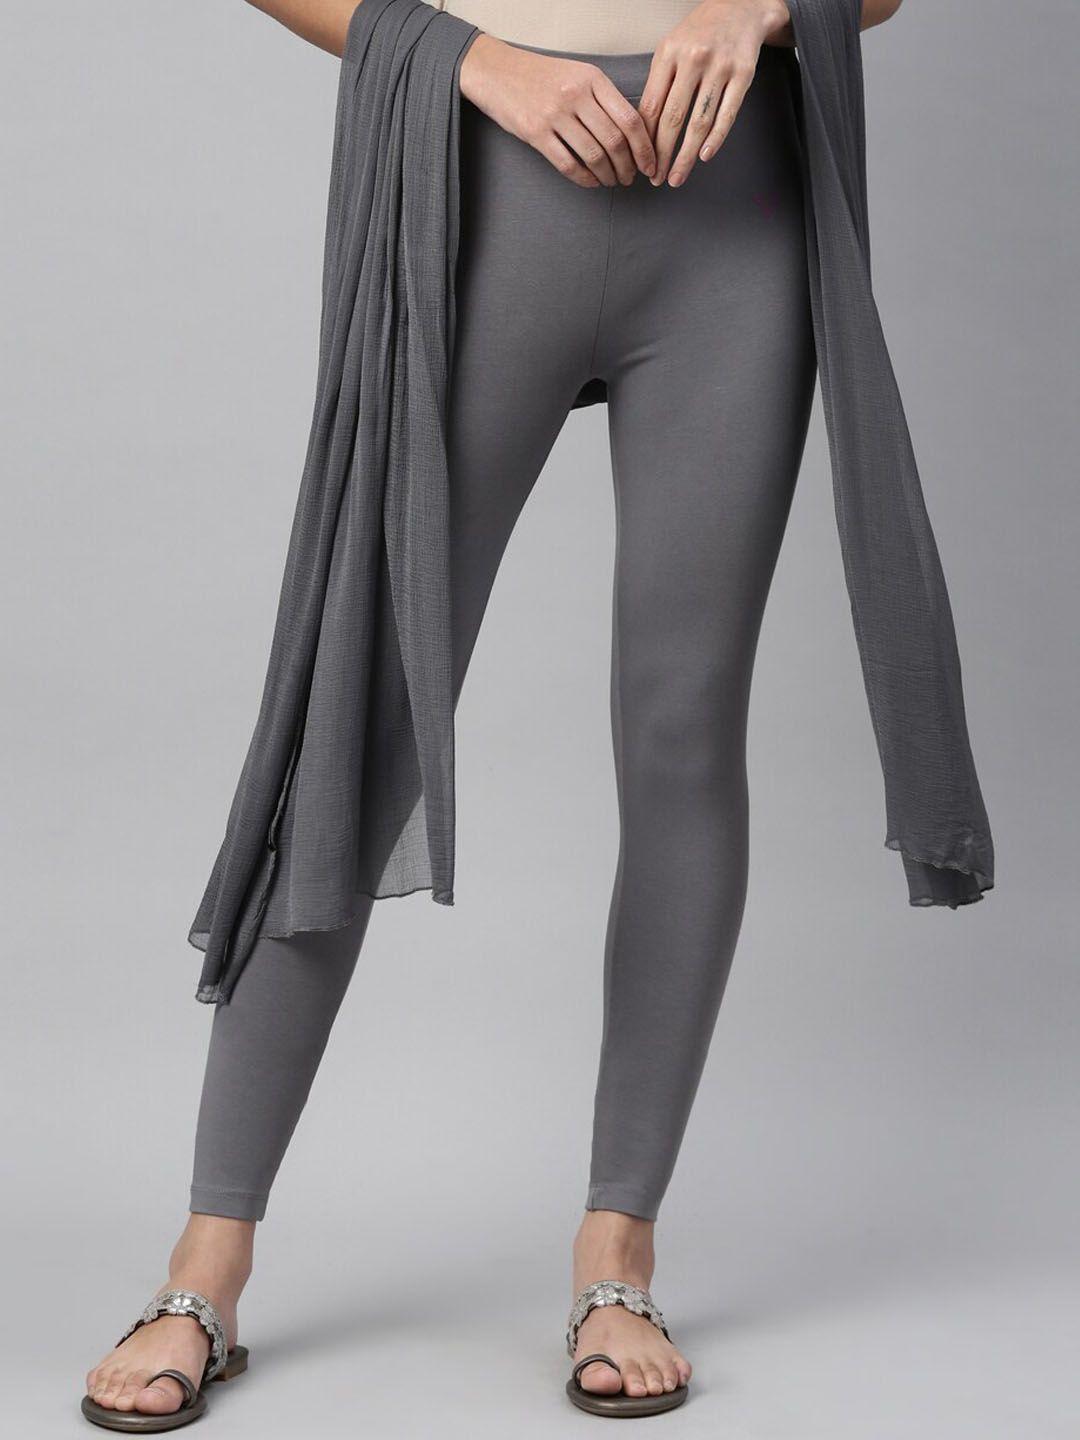 TWIN BIRDS Ankle-Length Leggings With Dupatta